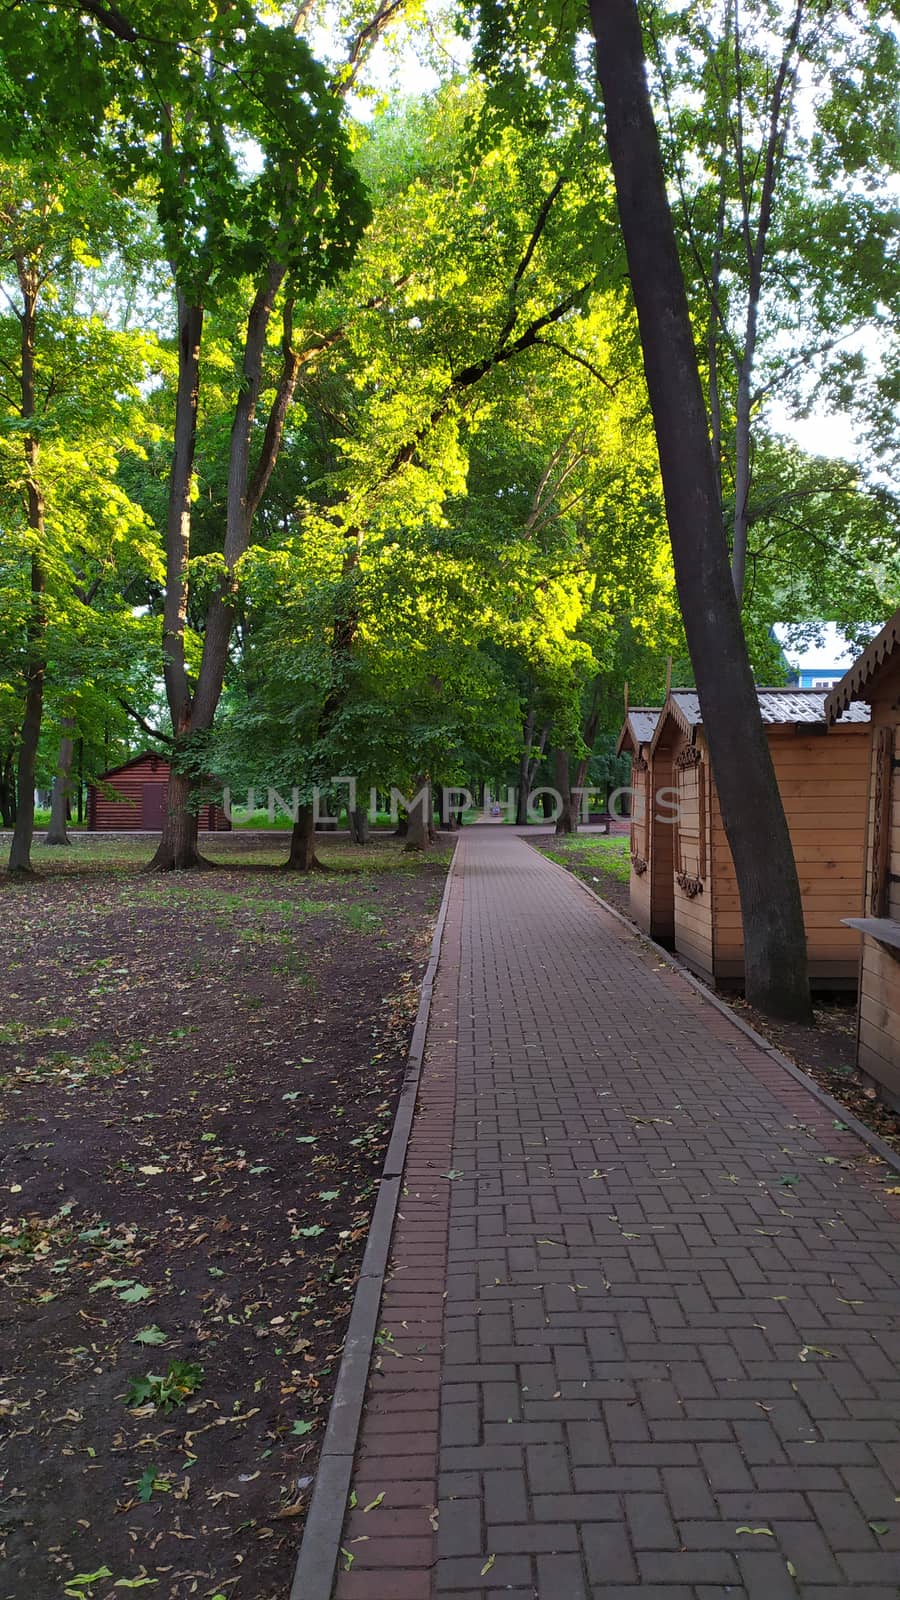 walking trail through forest, hiking trail, nature walk concept, green trees, plants on either side of pathway. Well maintained footpath through natural surroundings